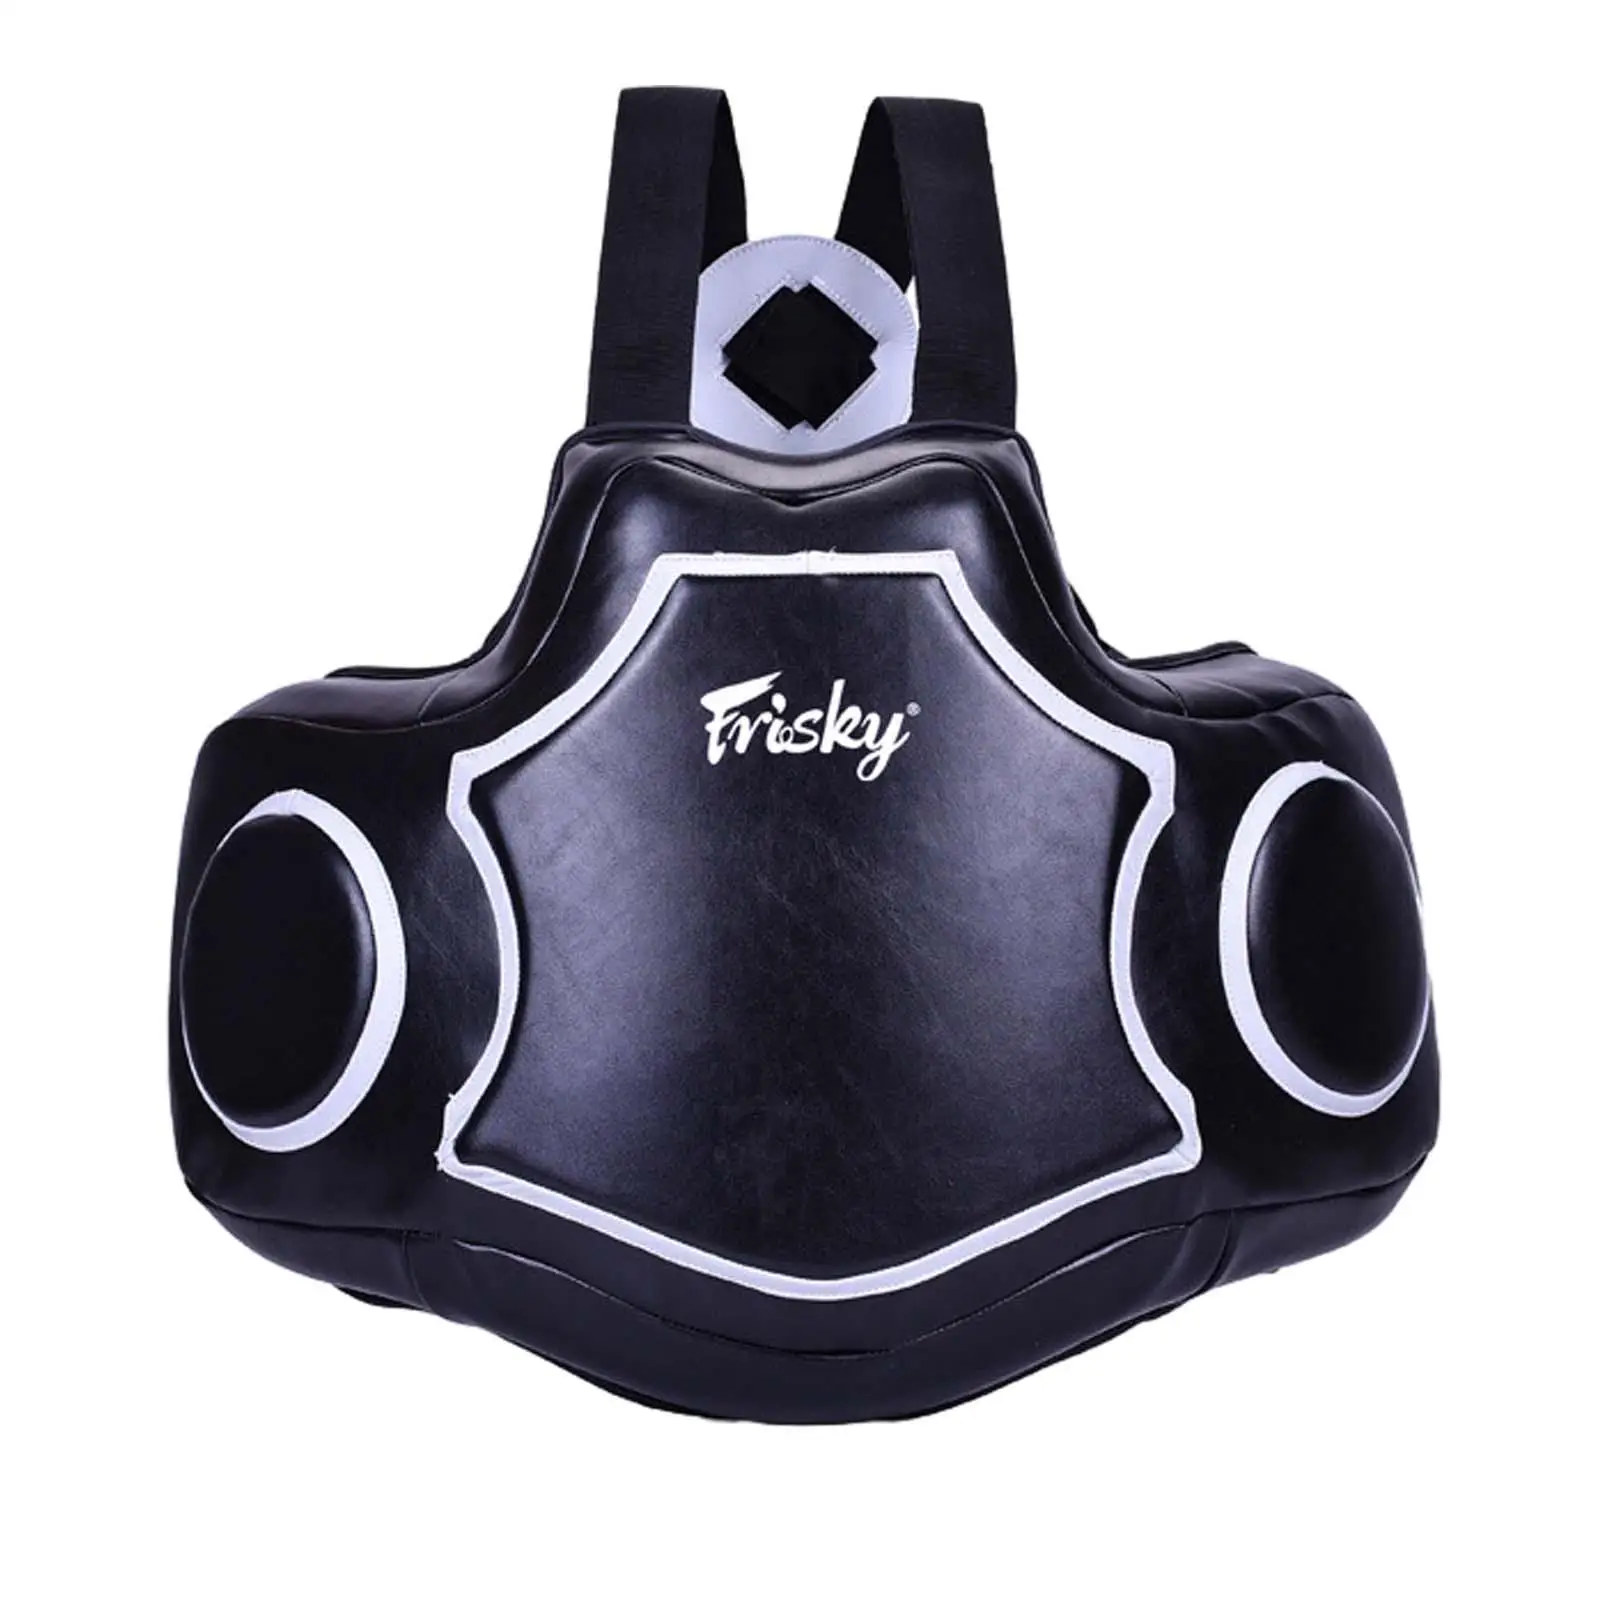 Boxing Body Protector Belly Protector for Men Women Boxing Protective Gear for Taekwondo Mma Sparring Martial Arts Training